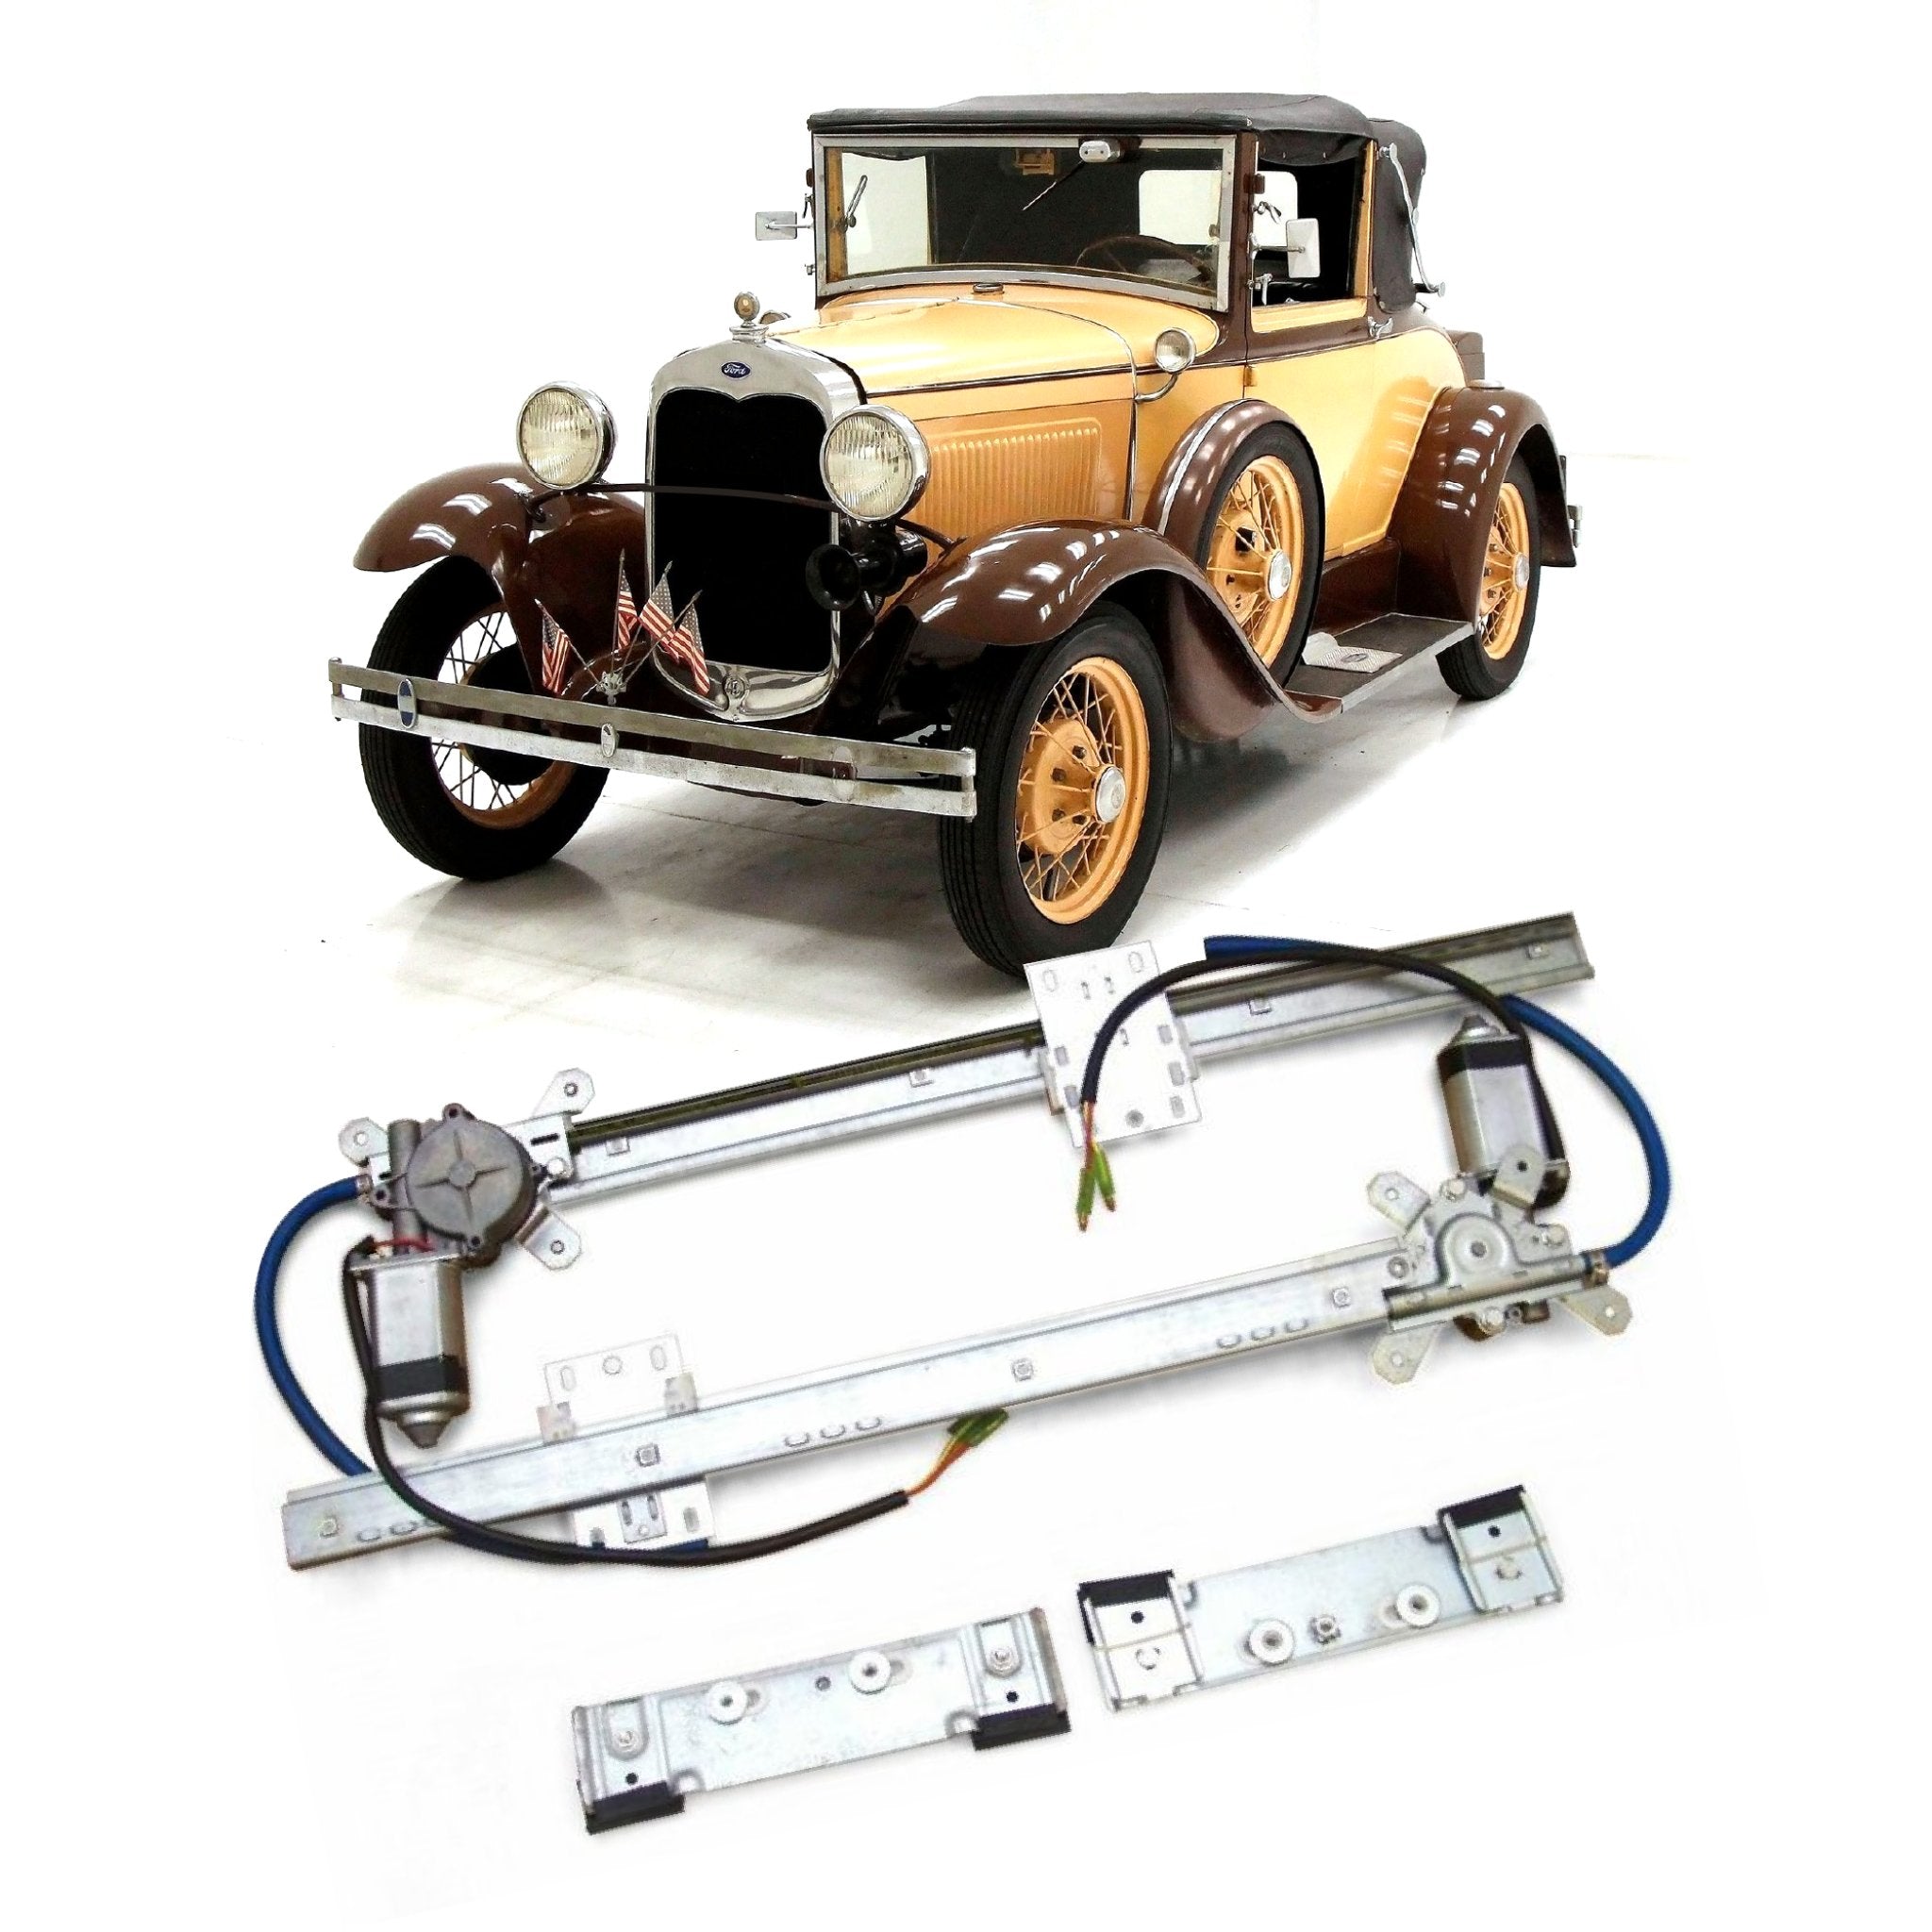 2 Door Flat Glass 12V Power Window Conversion Kit for 1930 Model A Cabriolet